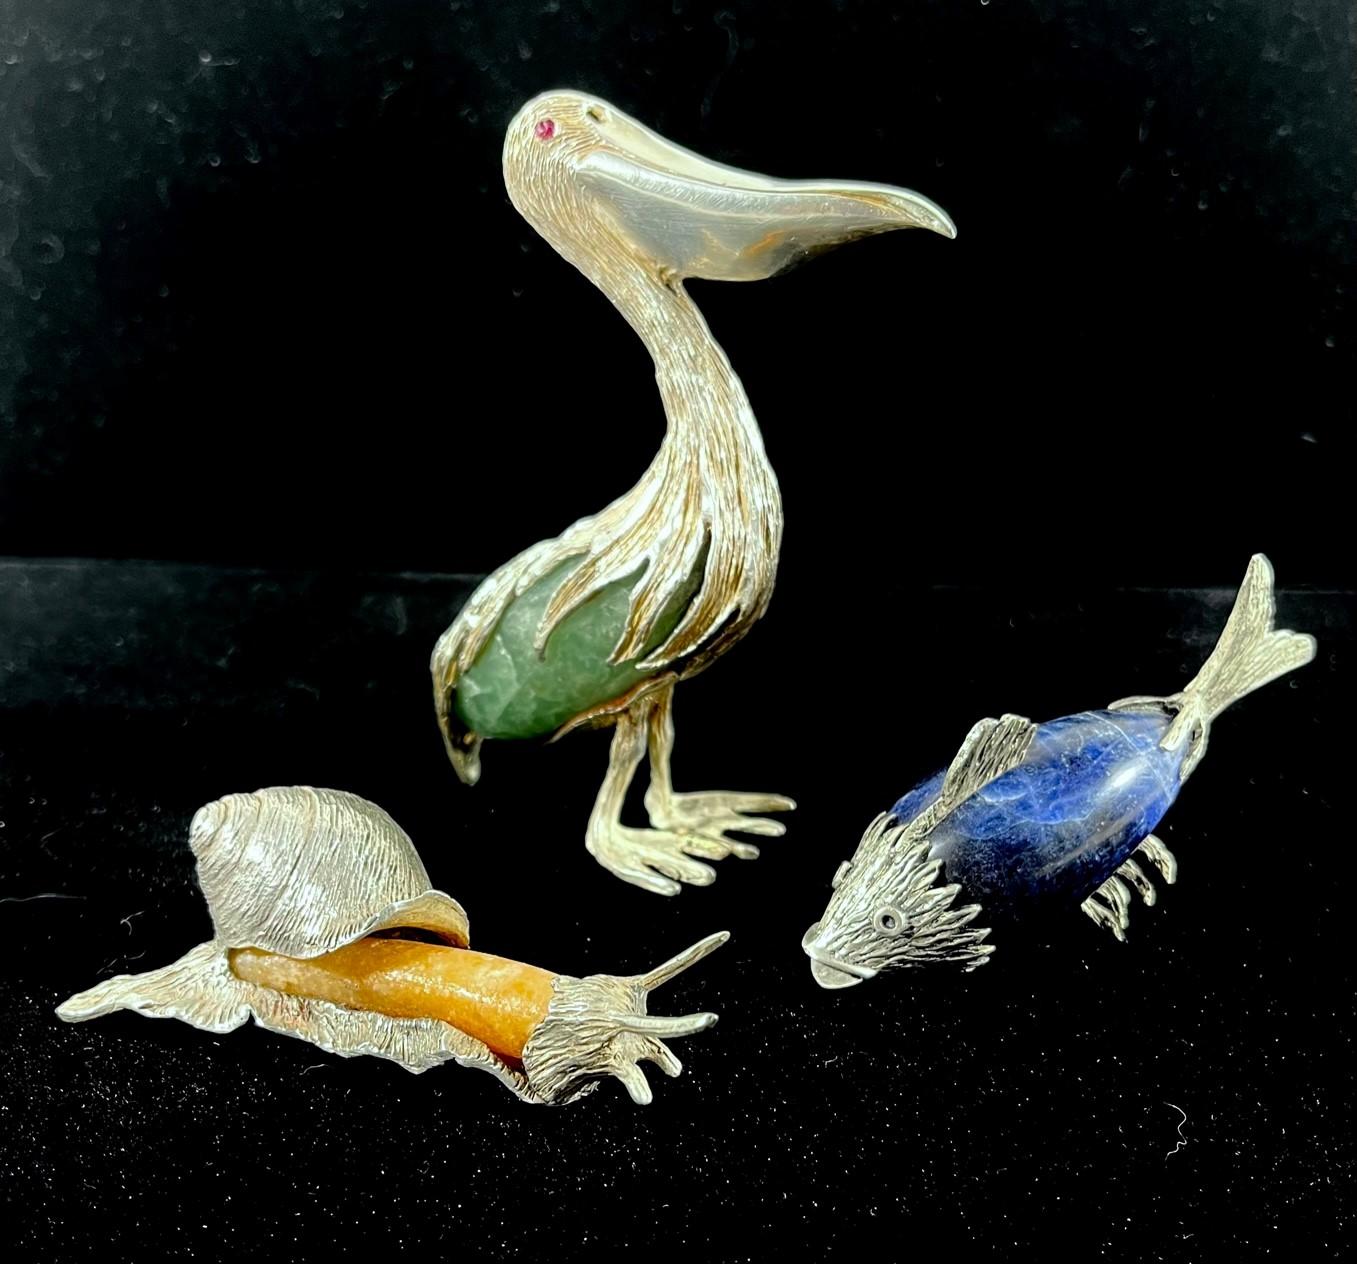 Group of Three Rare Miniature Animals in Sterling Silver and Semi-Precious Stones.

These rare miniature figurines convey a high level of quality and art value. The splendid work in Sterling silver is handmade by a skilled silversmith in South